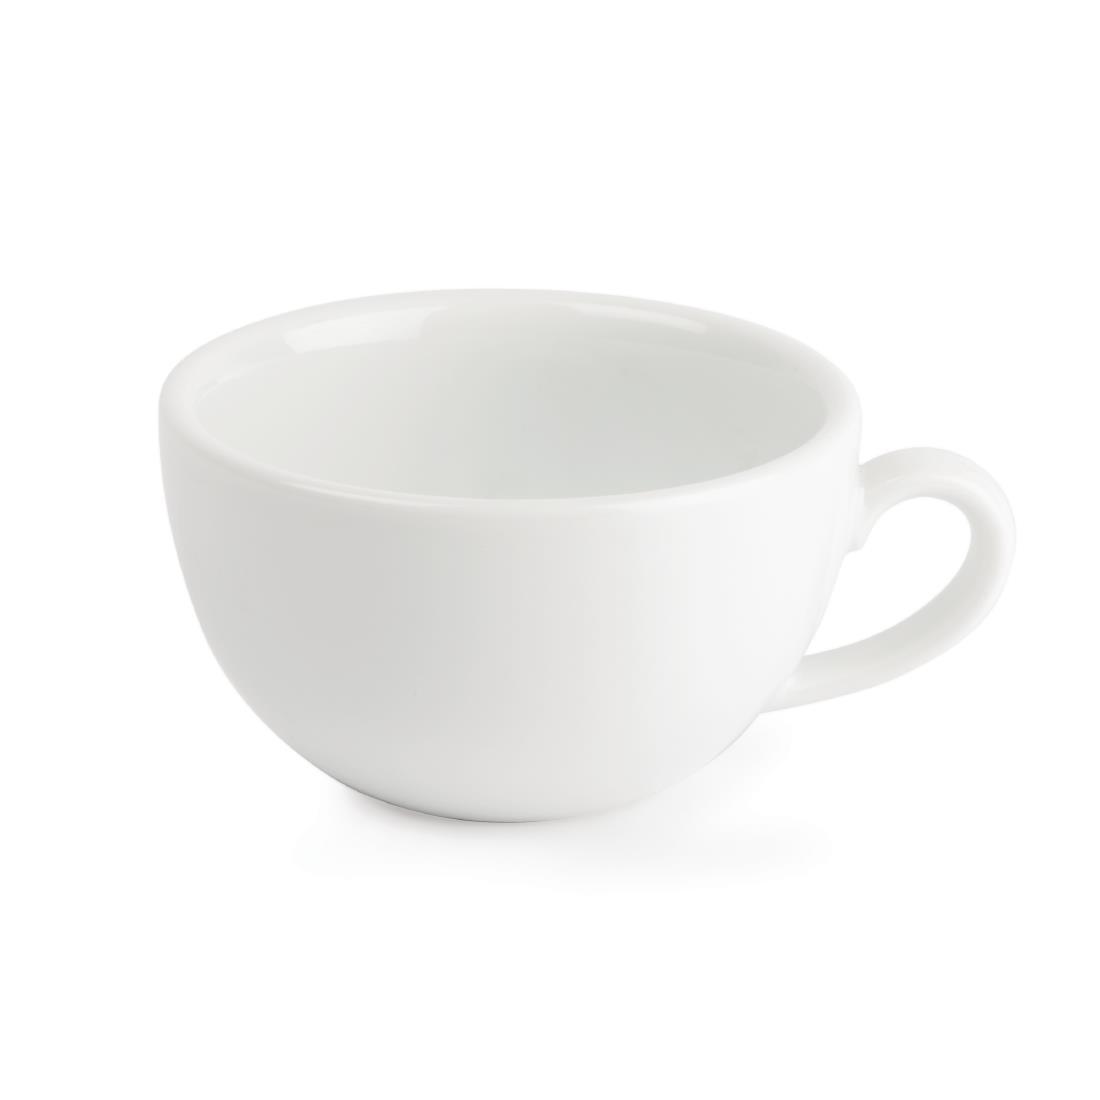 Royal Porcelain Classic White Cappuccino Cups 200ml (Pack of 12) - CG023  - 2